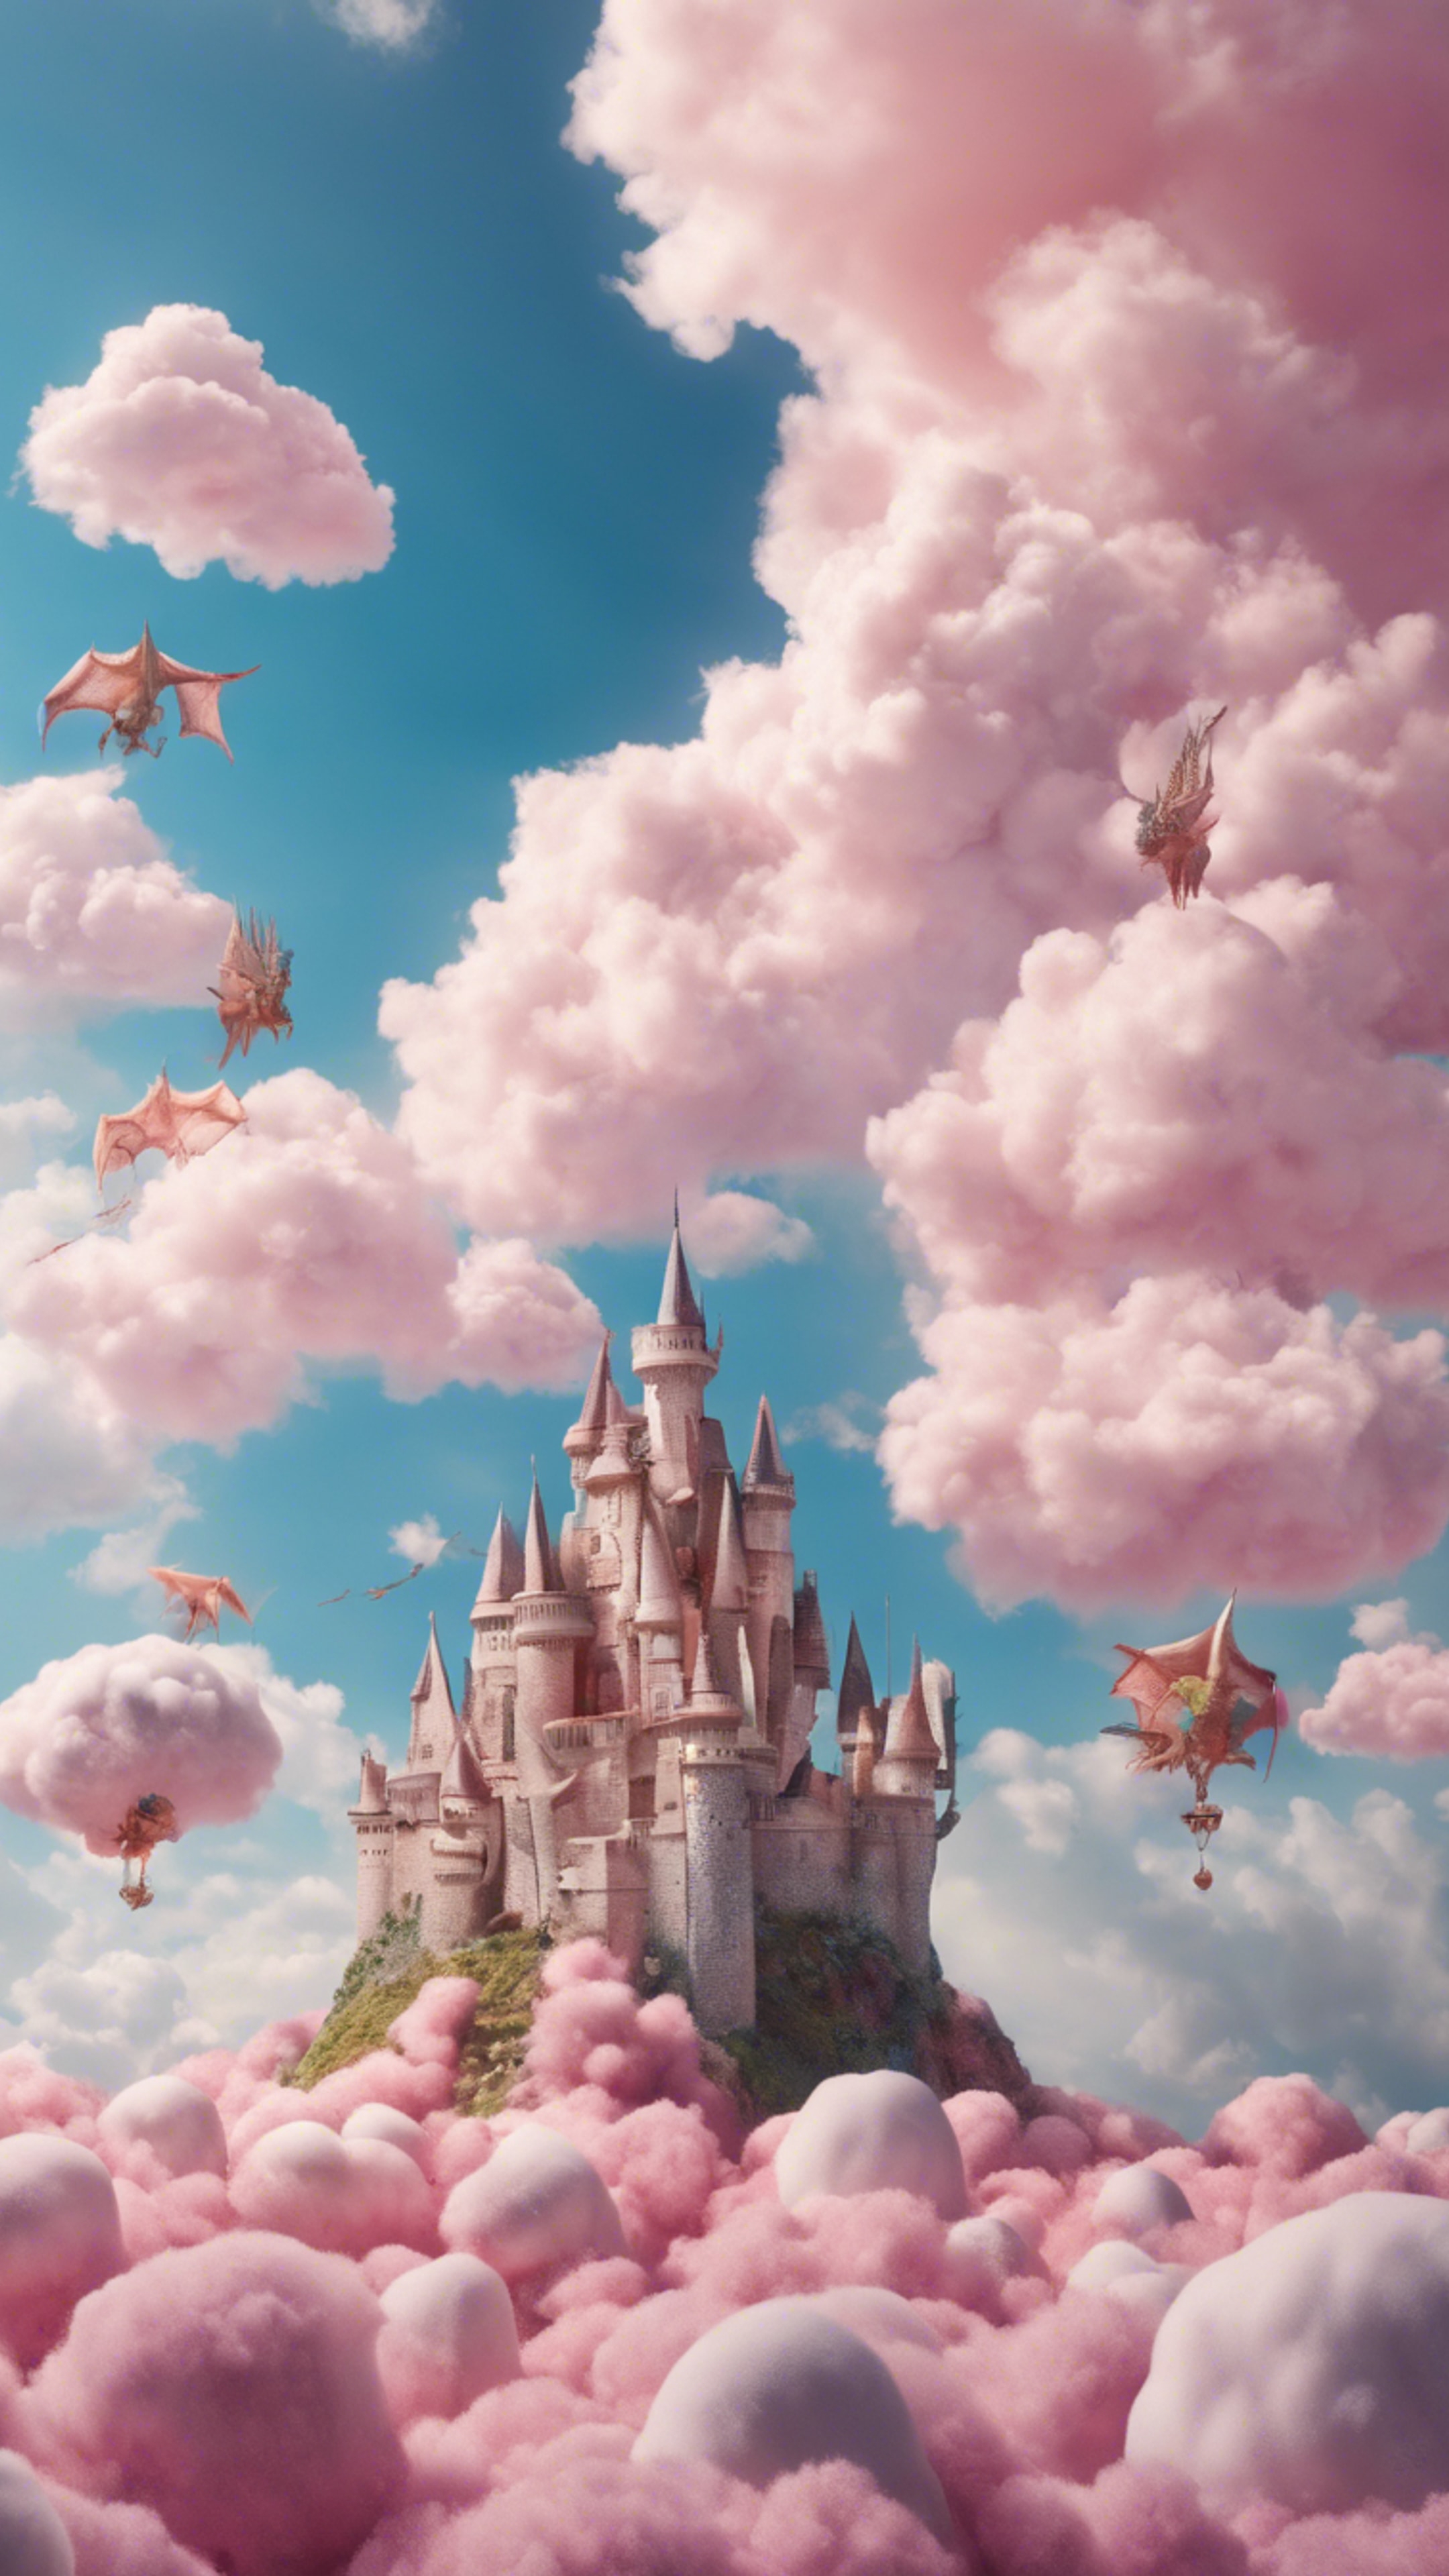 A castle floating in the sky above fluffy, cotton-candy-like clouds surrounded by a huddle of playful, magical dragons. Tapet[be63bba74c3941c98c10]